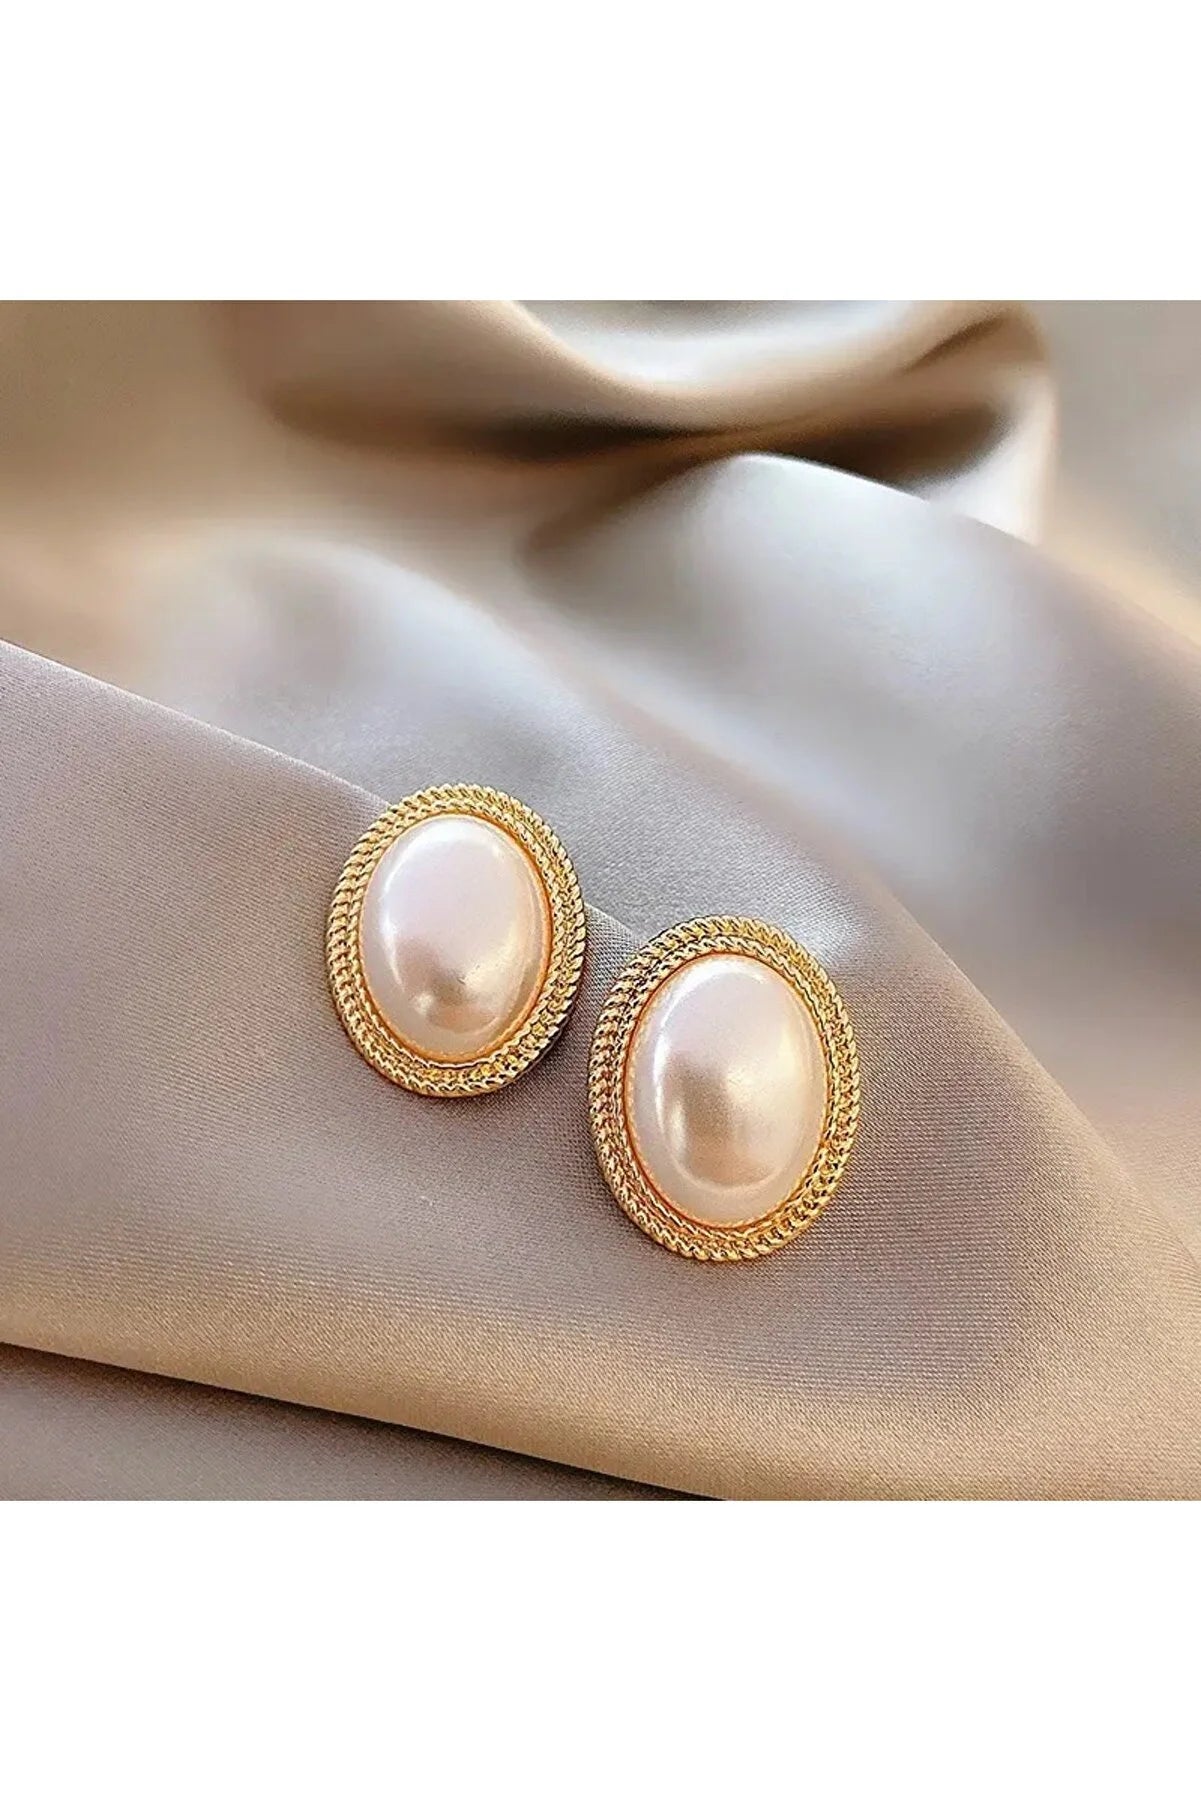 Gold Sultan Earrings with Big Pearls for Women - Hypoallergenic Fashion Statement Earring Set